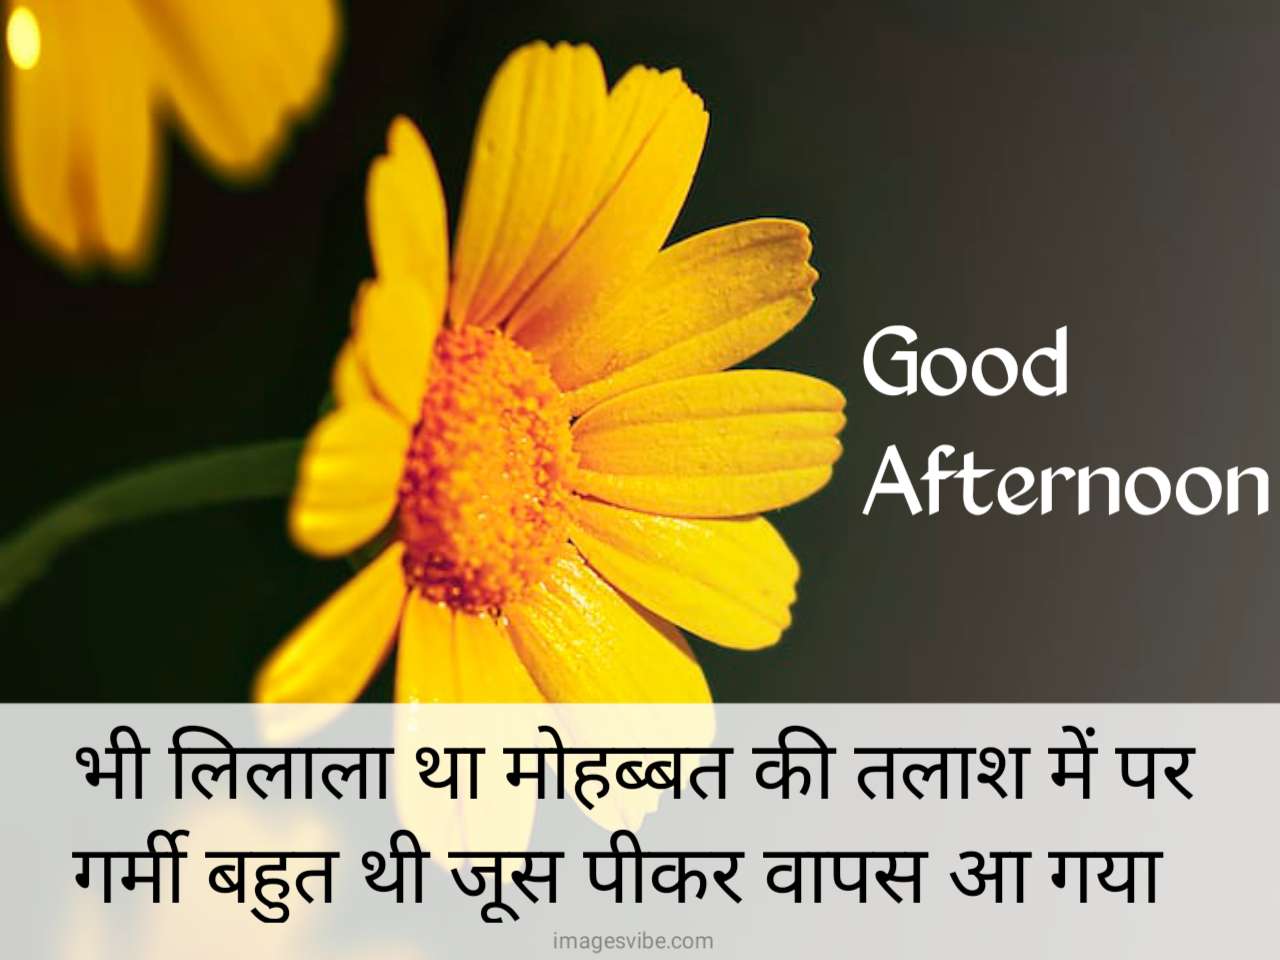 Beautiful Good Afternoon Hindi Images & Quotes 2023 - Images Vibe